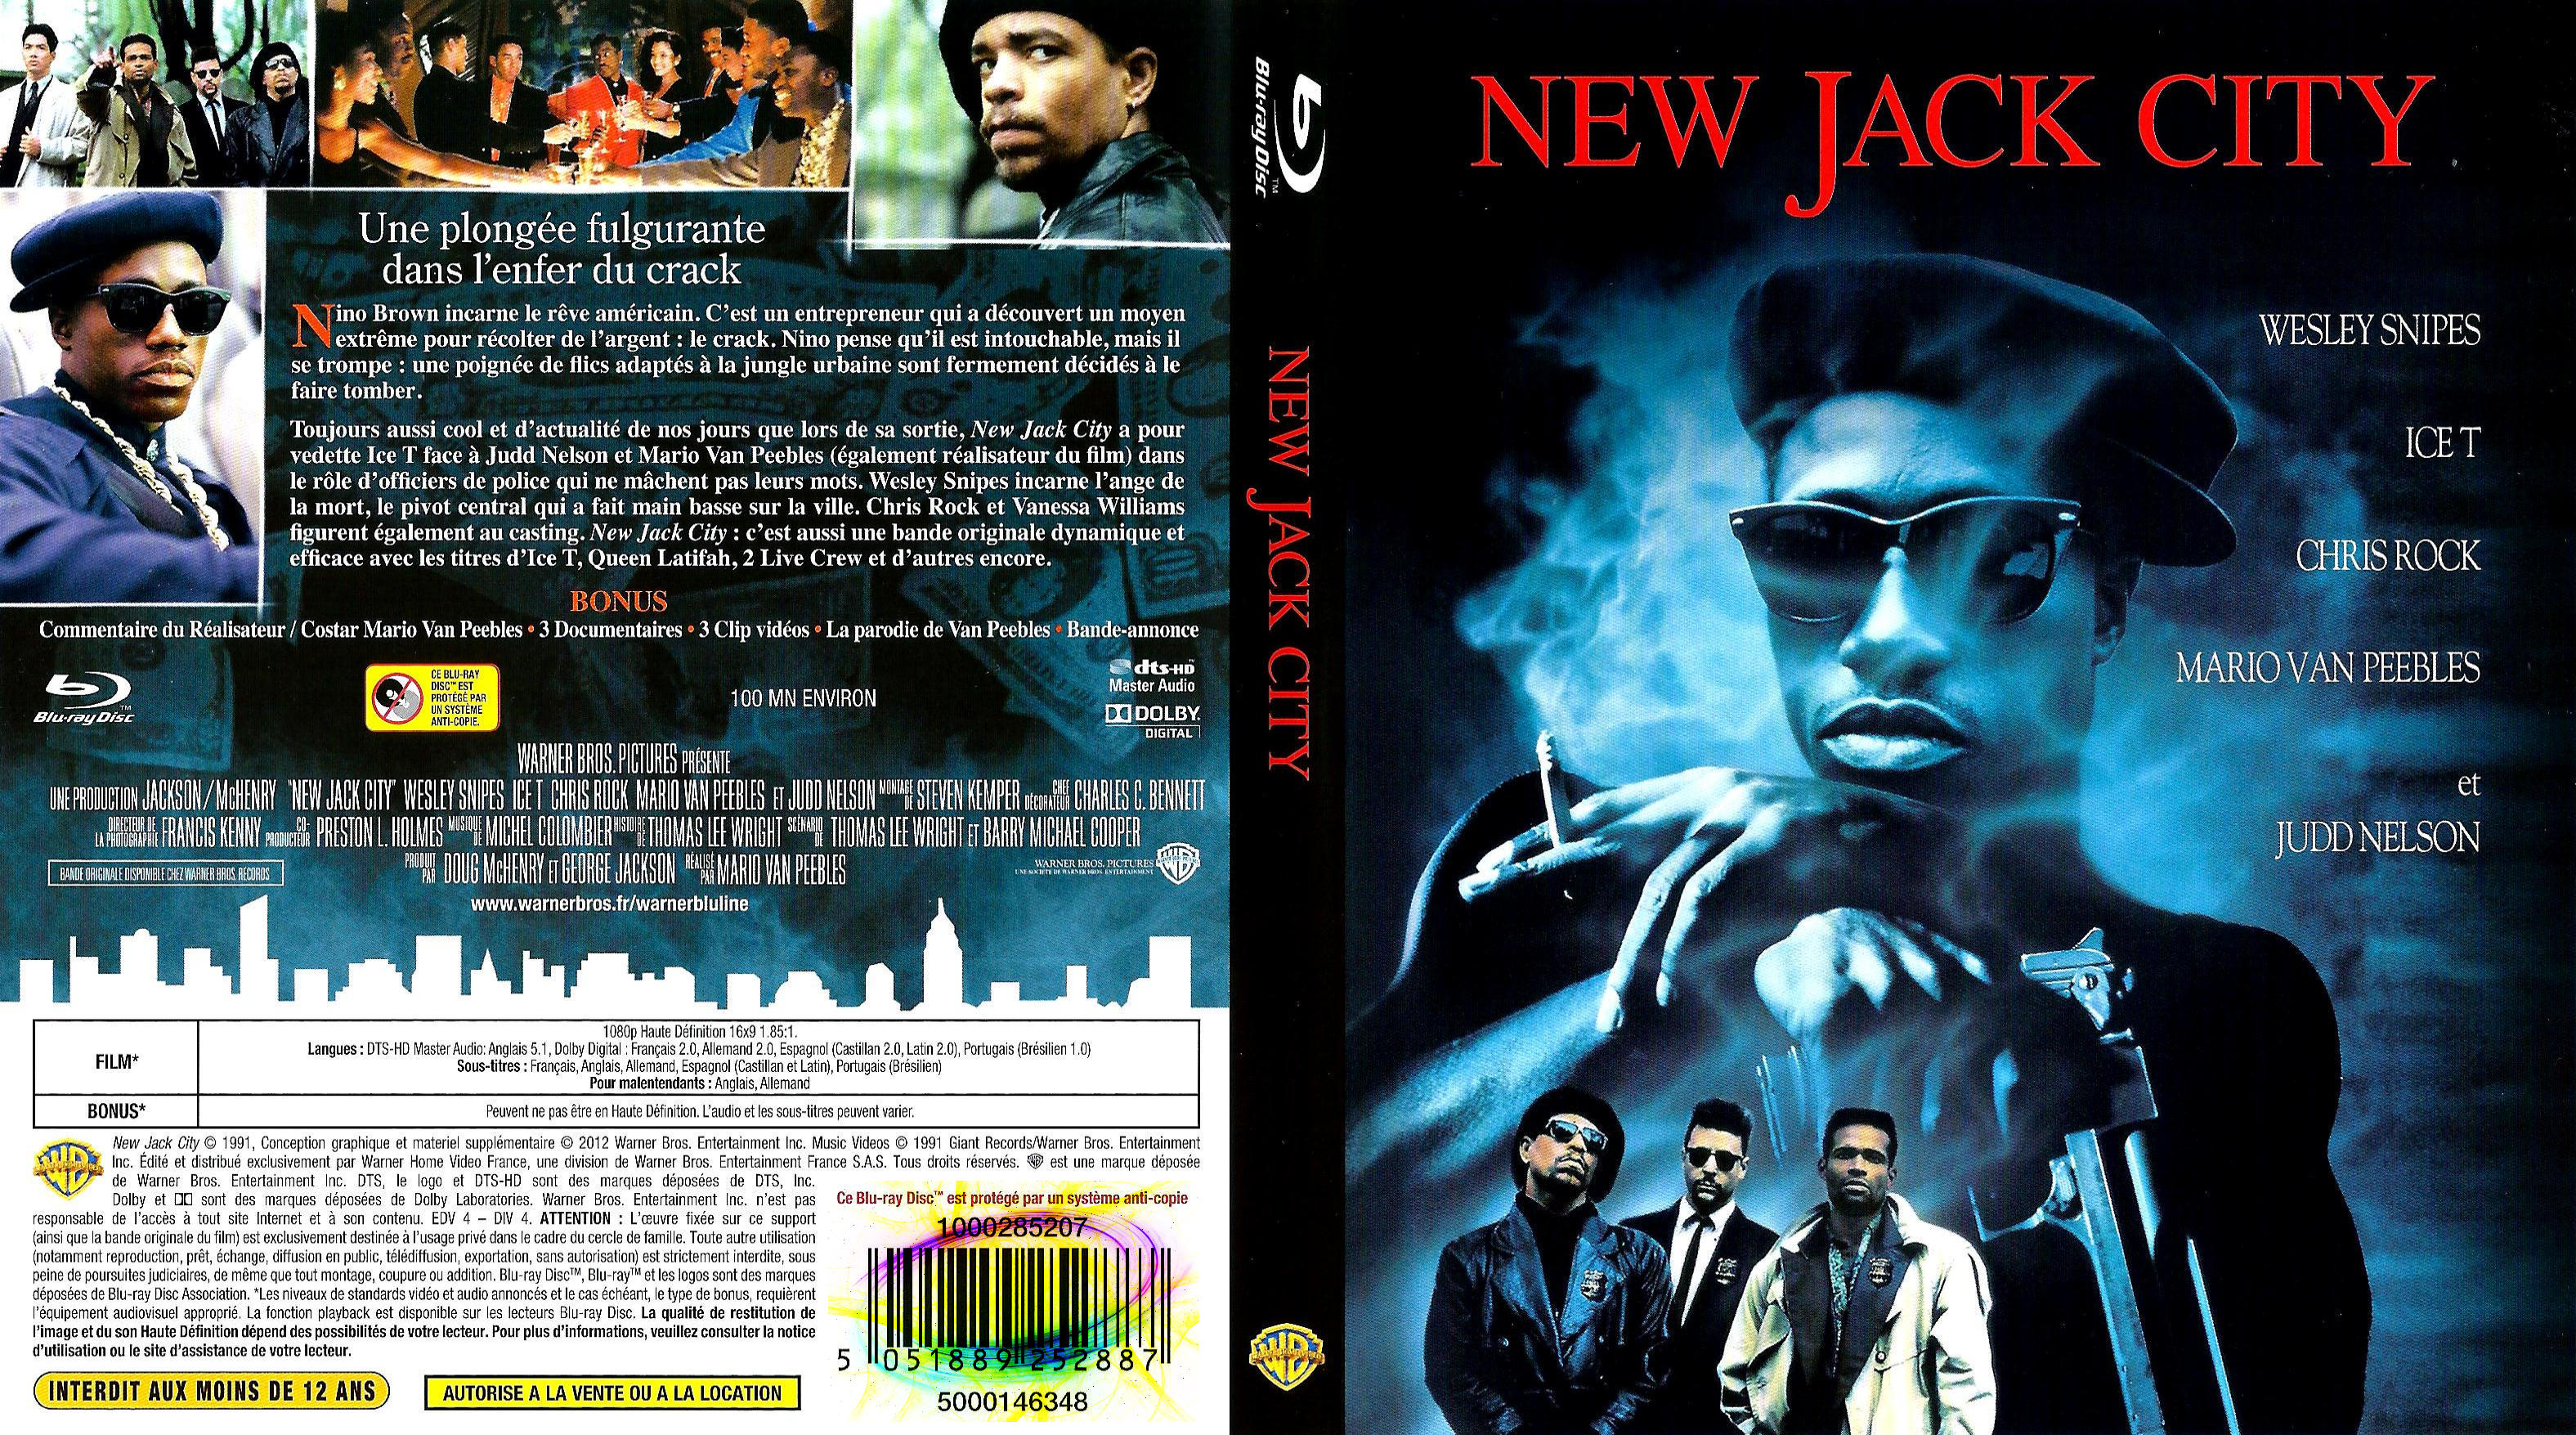 Jaquette DVD New jack city (BLU-RAY)